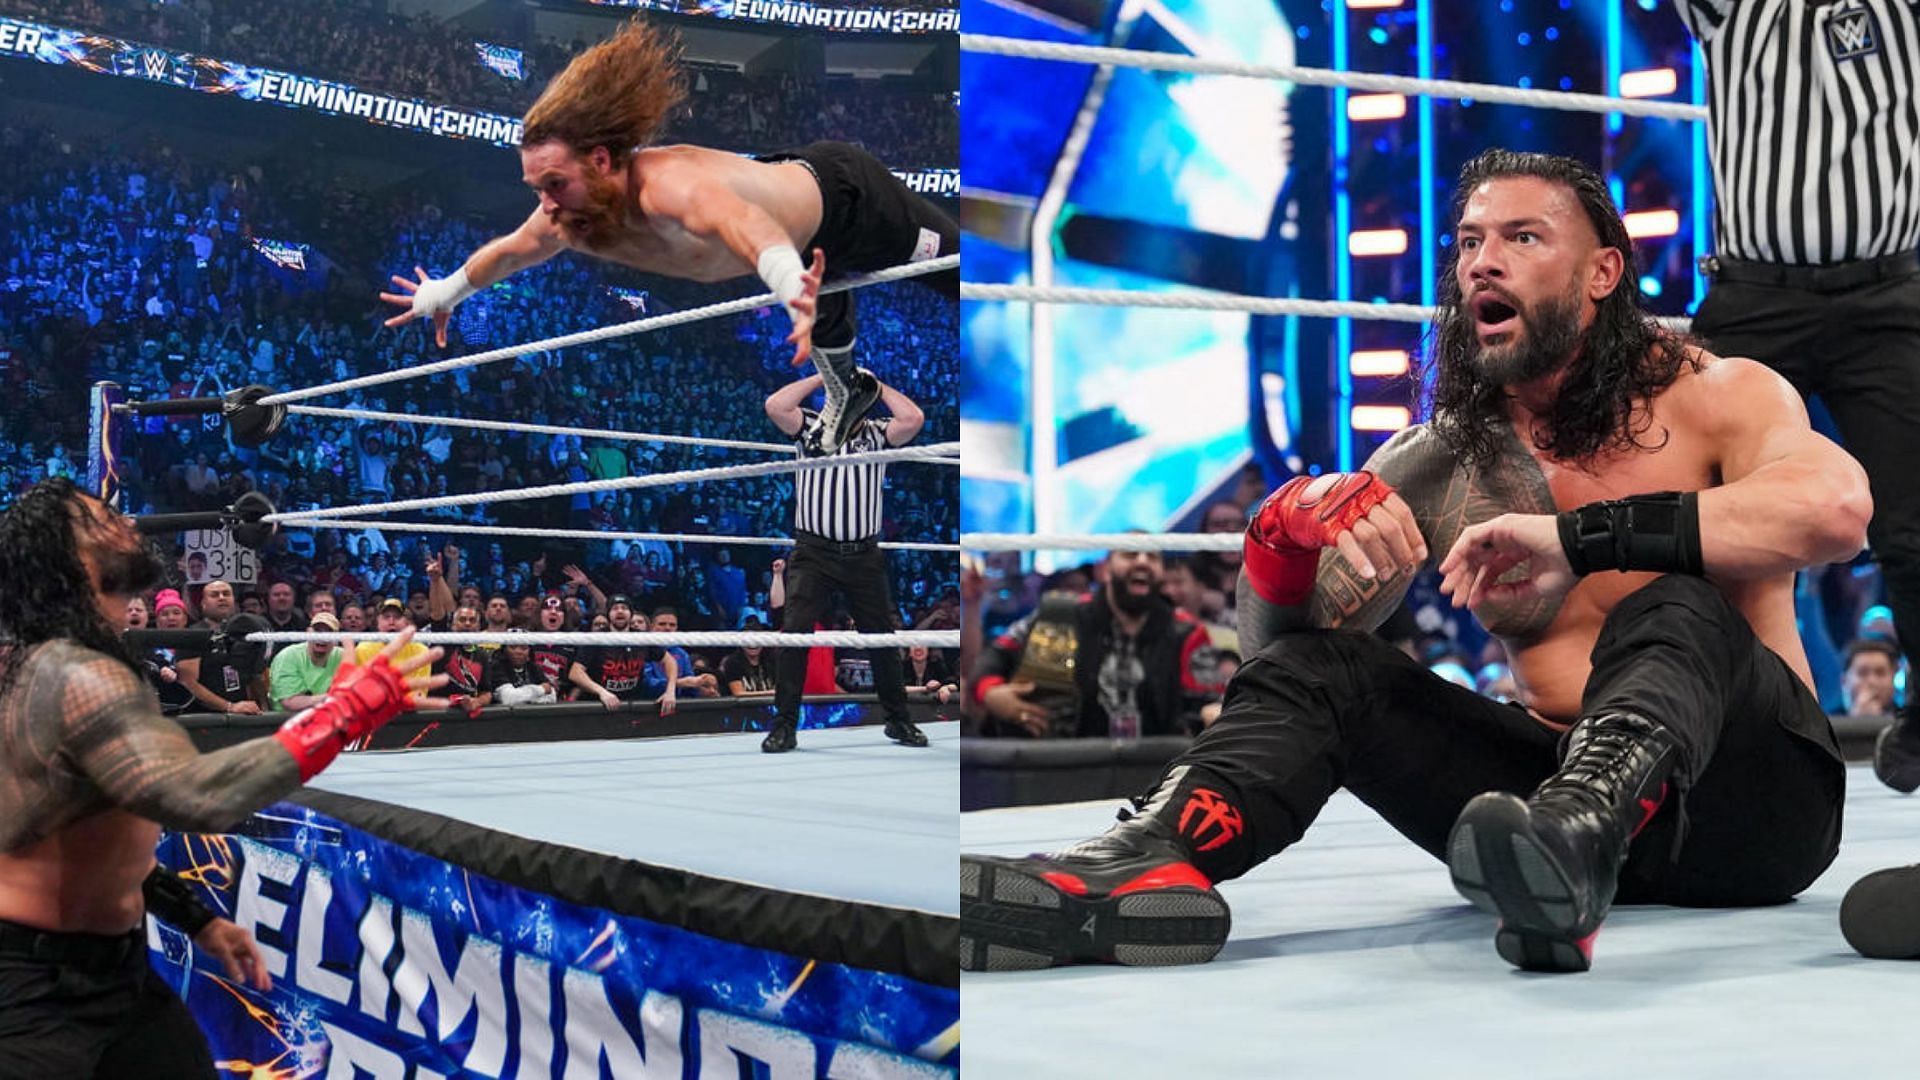 Roman Reigns defeated Sami Zayn at the Elimination Chamber PLE